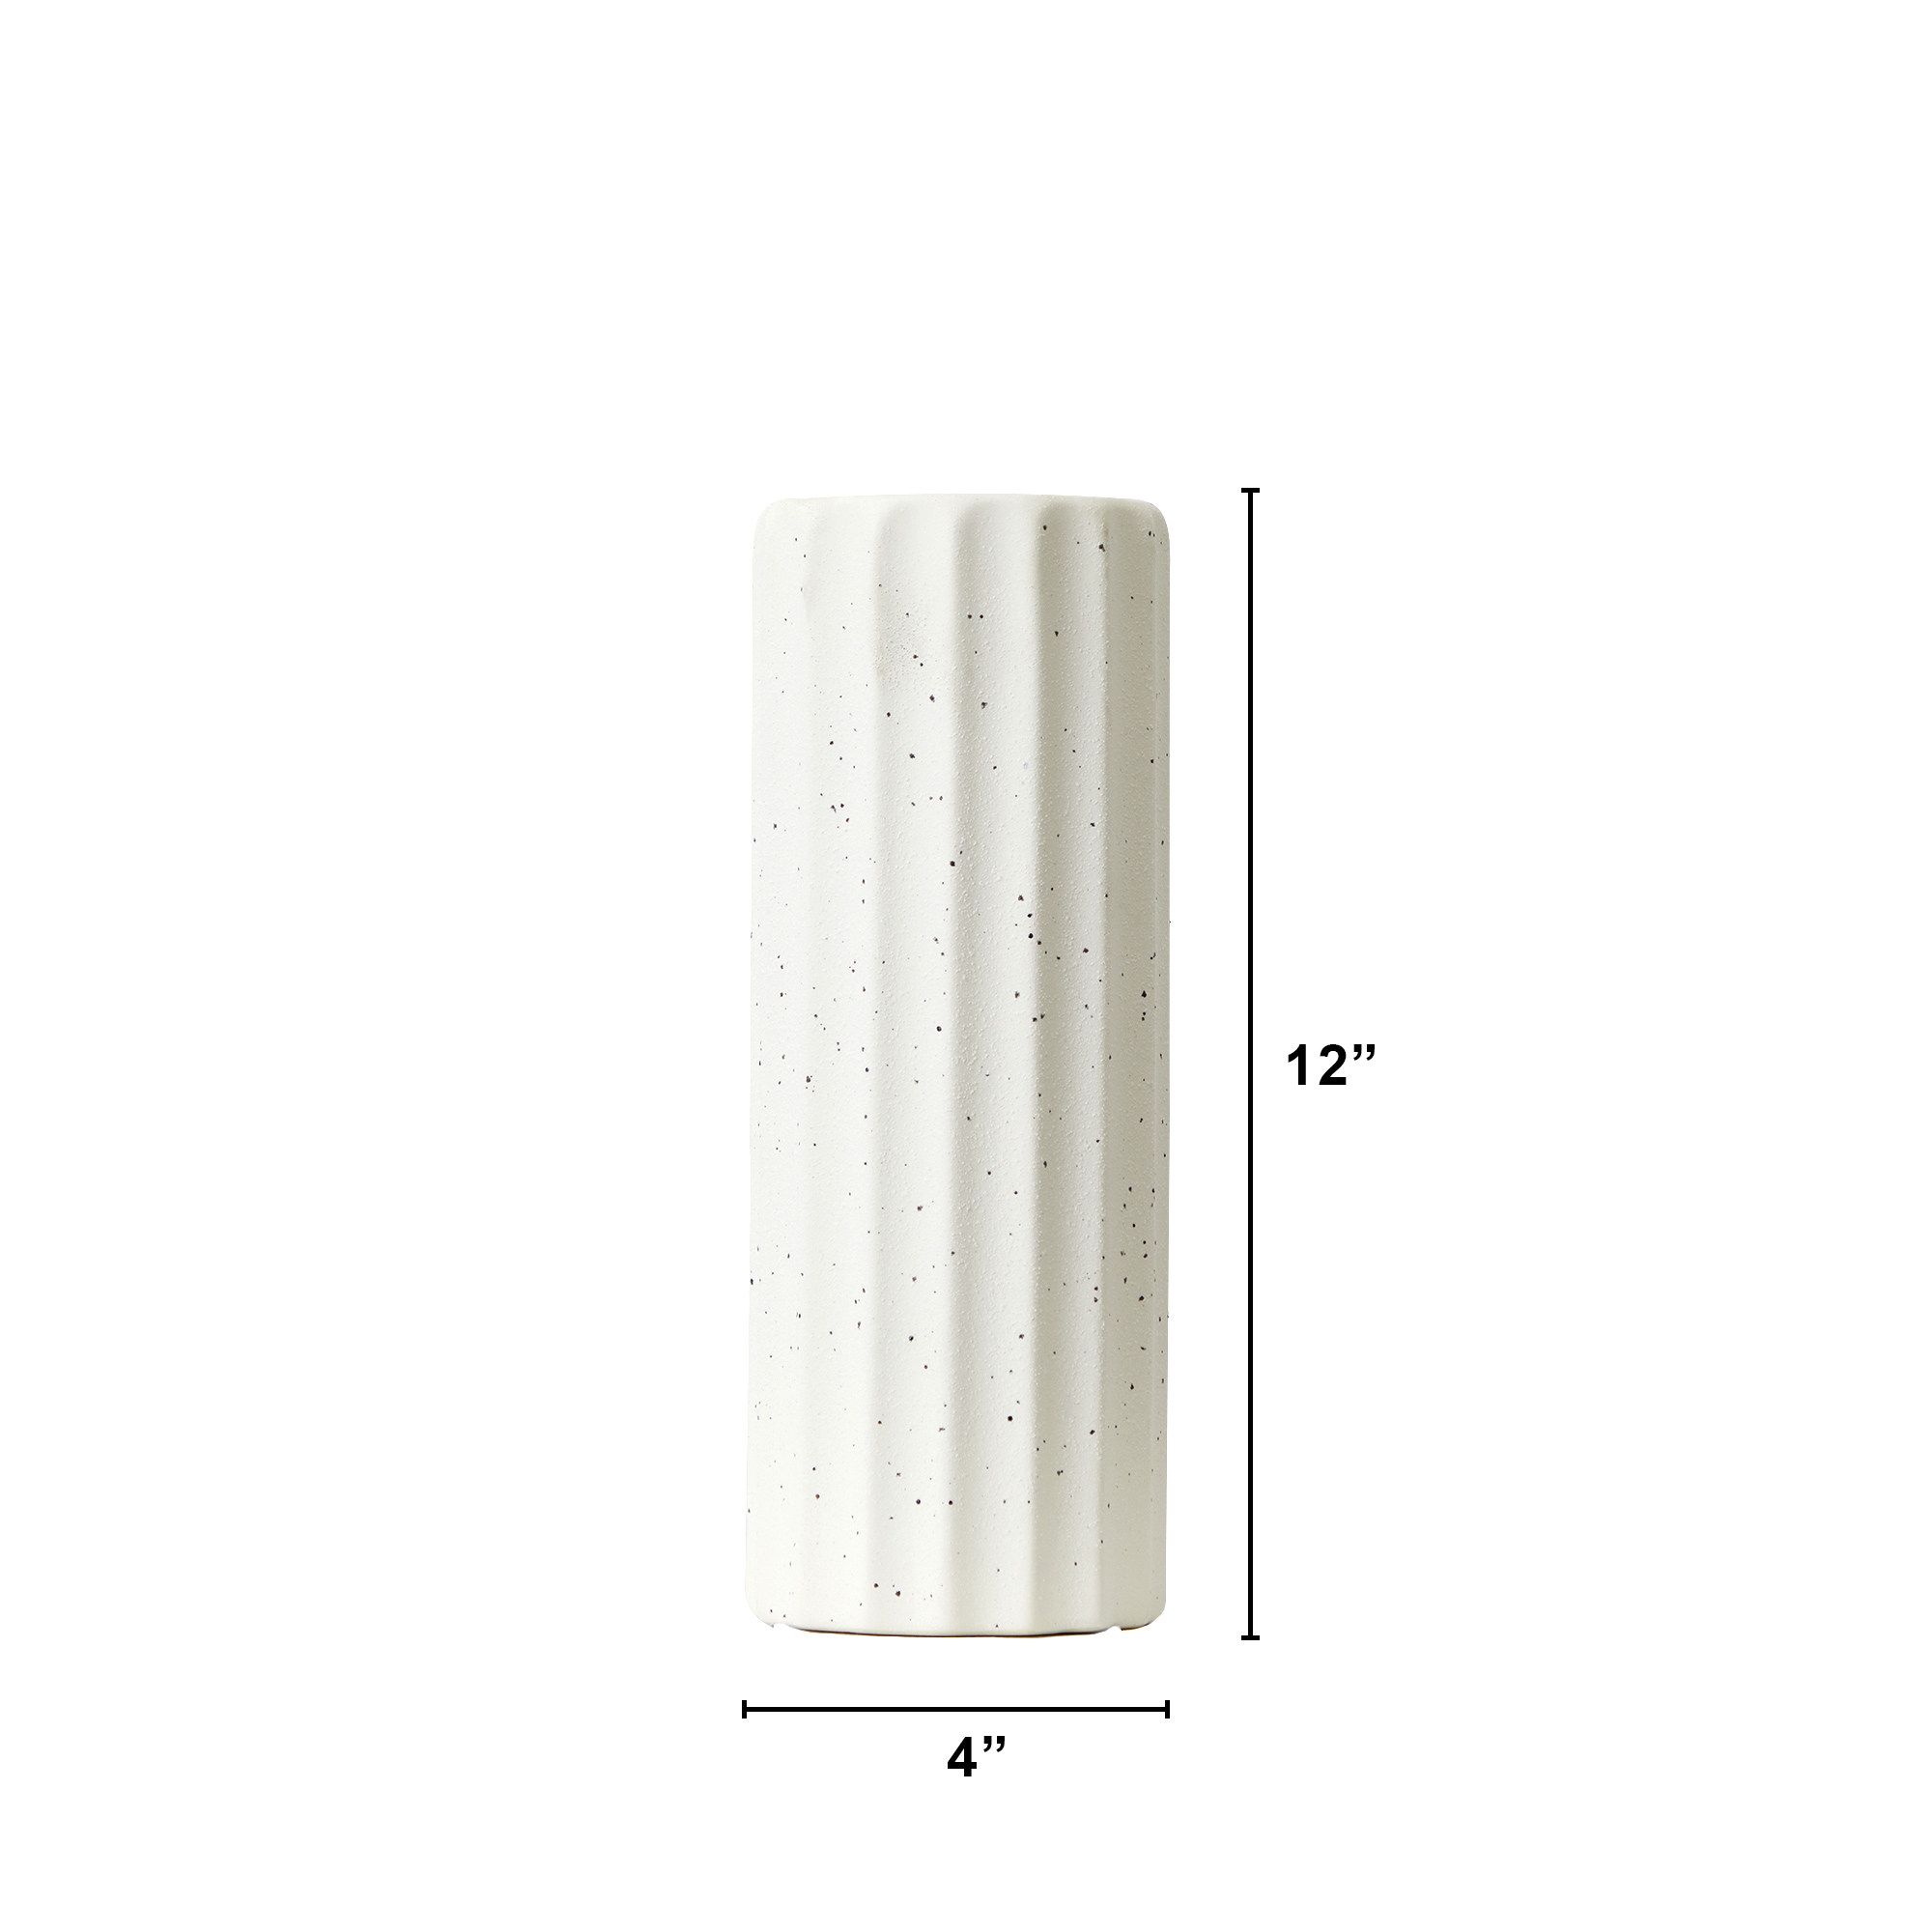 Mainstays 12" White Speckled Wavy Textured Stone Vase - image 4 of 5